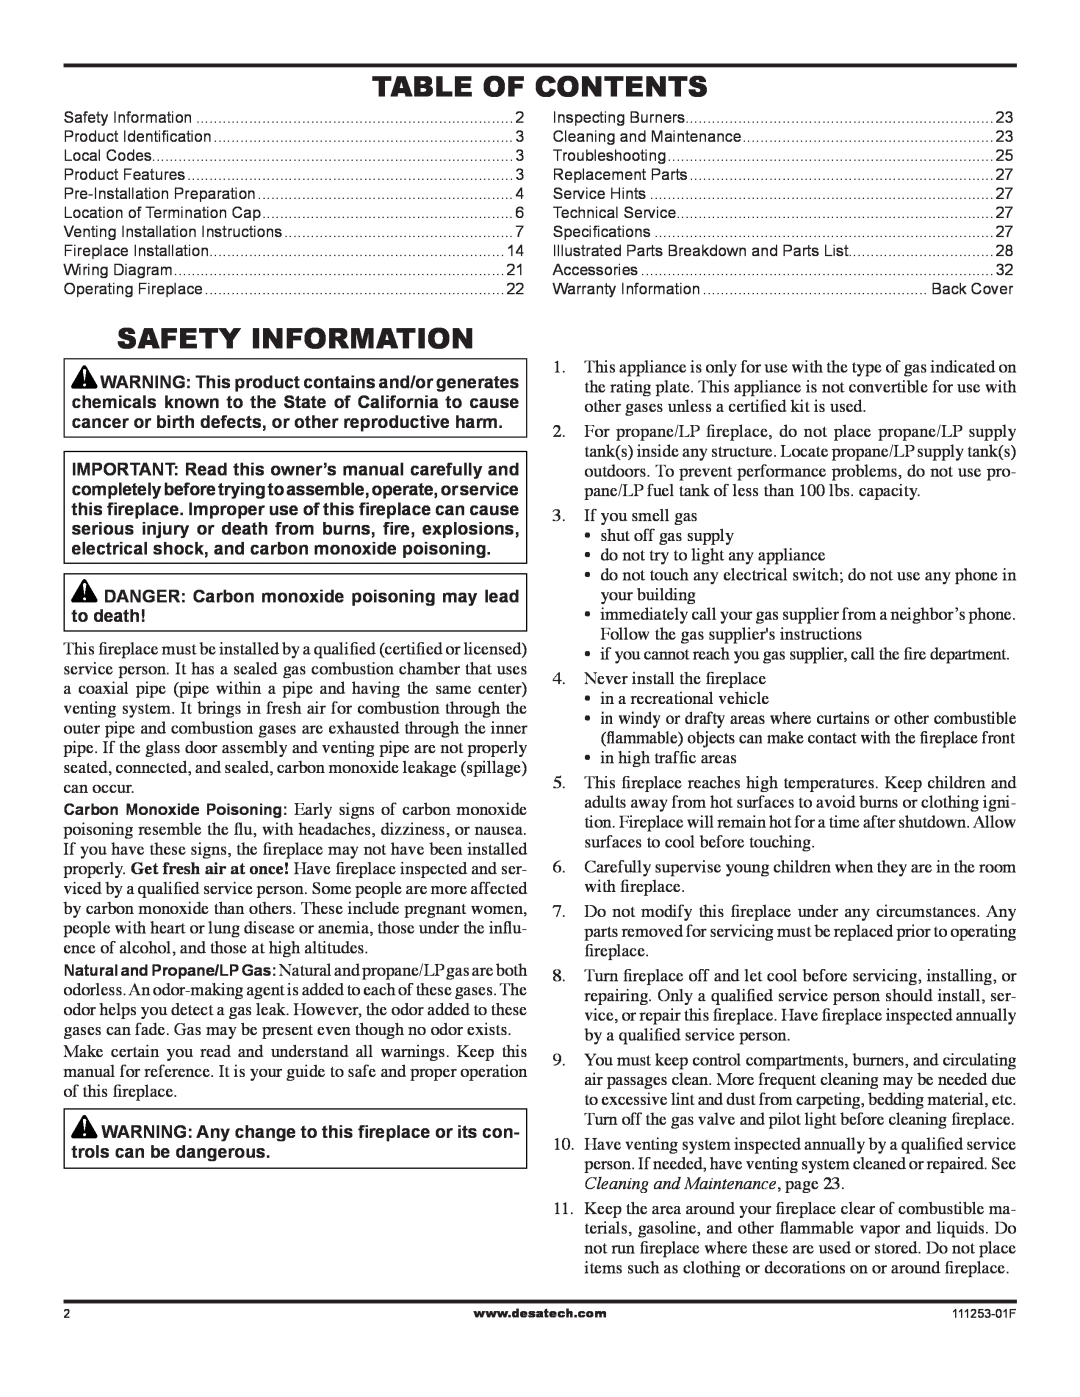 Desa (V)V36EN-B, VV36ENC1 SERIES, VV36EPC1 SERIES Table of Contents, Safety Information, Cleaning and Maintenance, page 